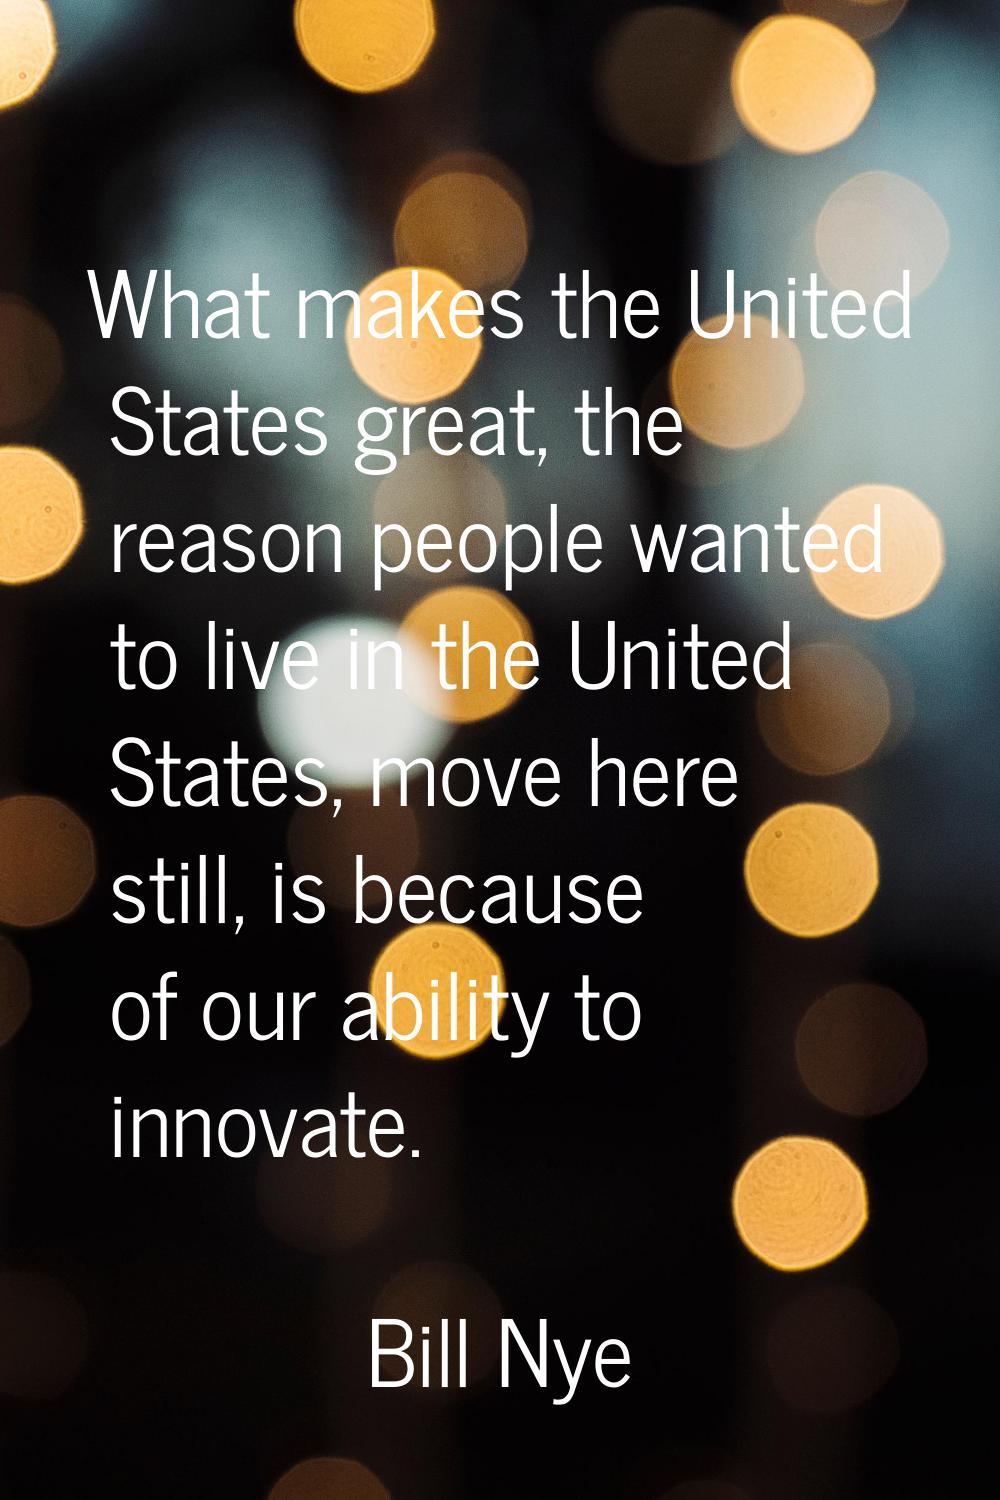 What makes the United States great, the reason people wanted to live in the United States, move her